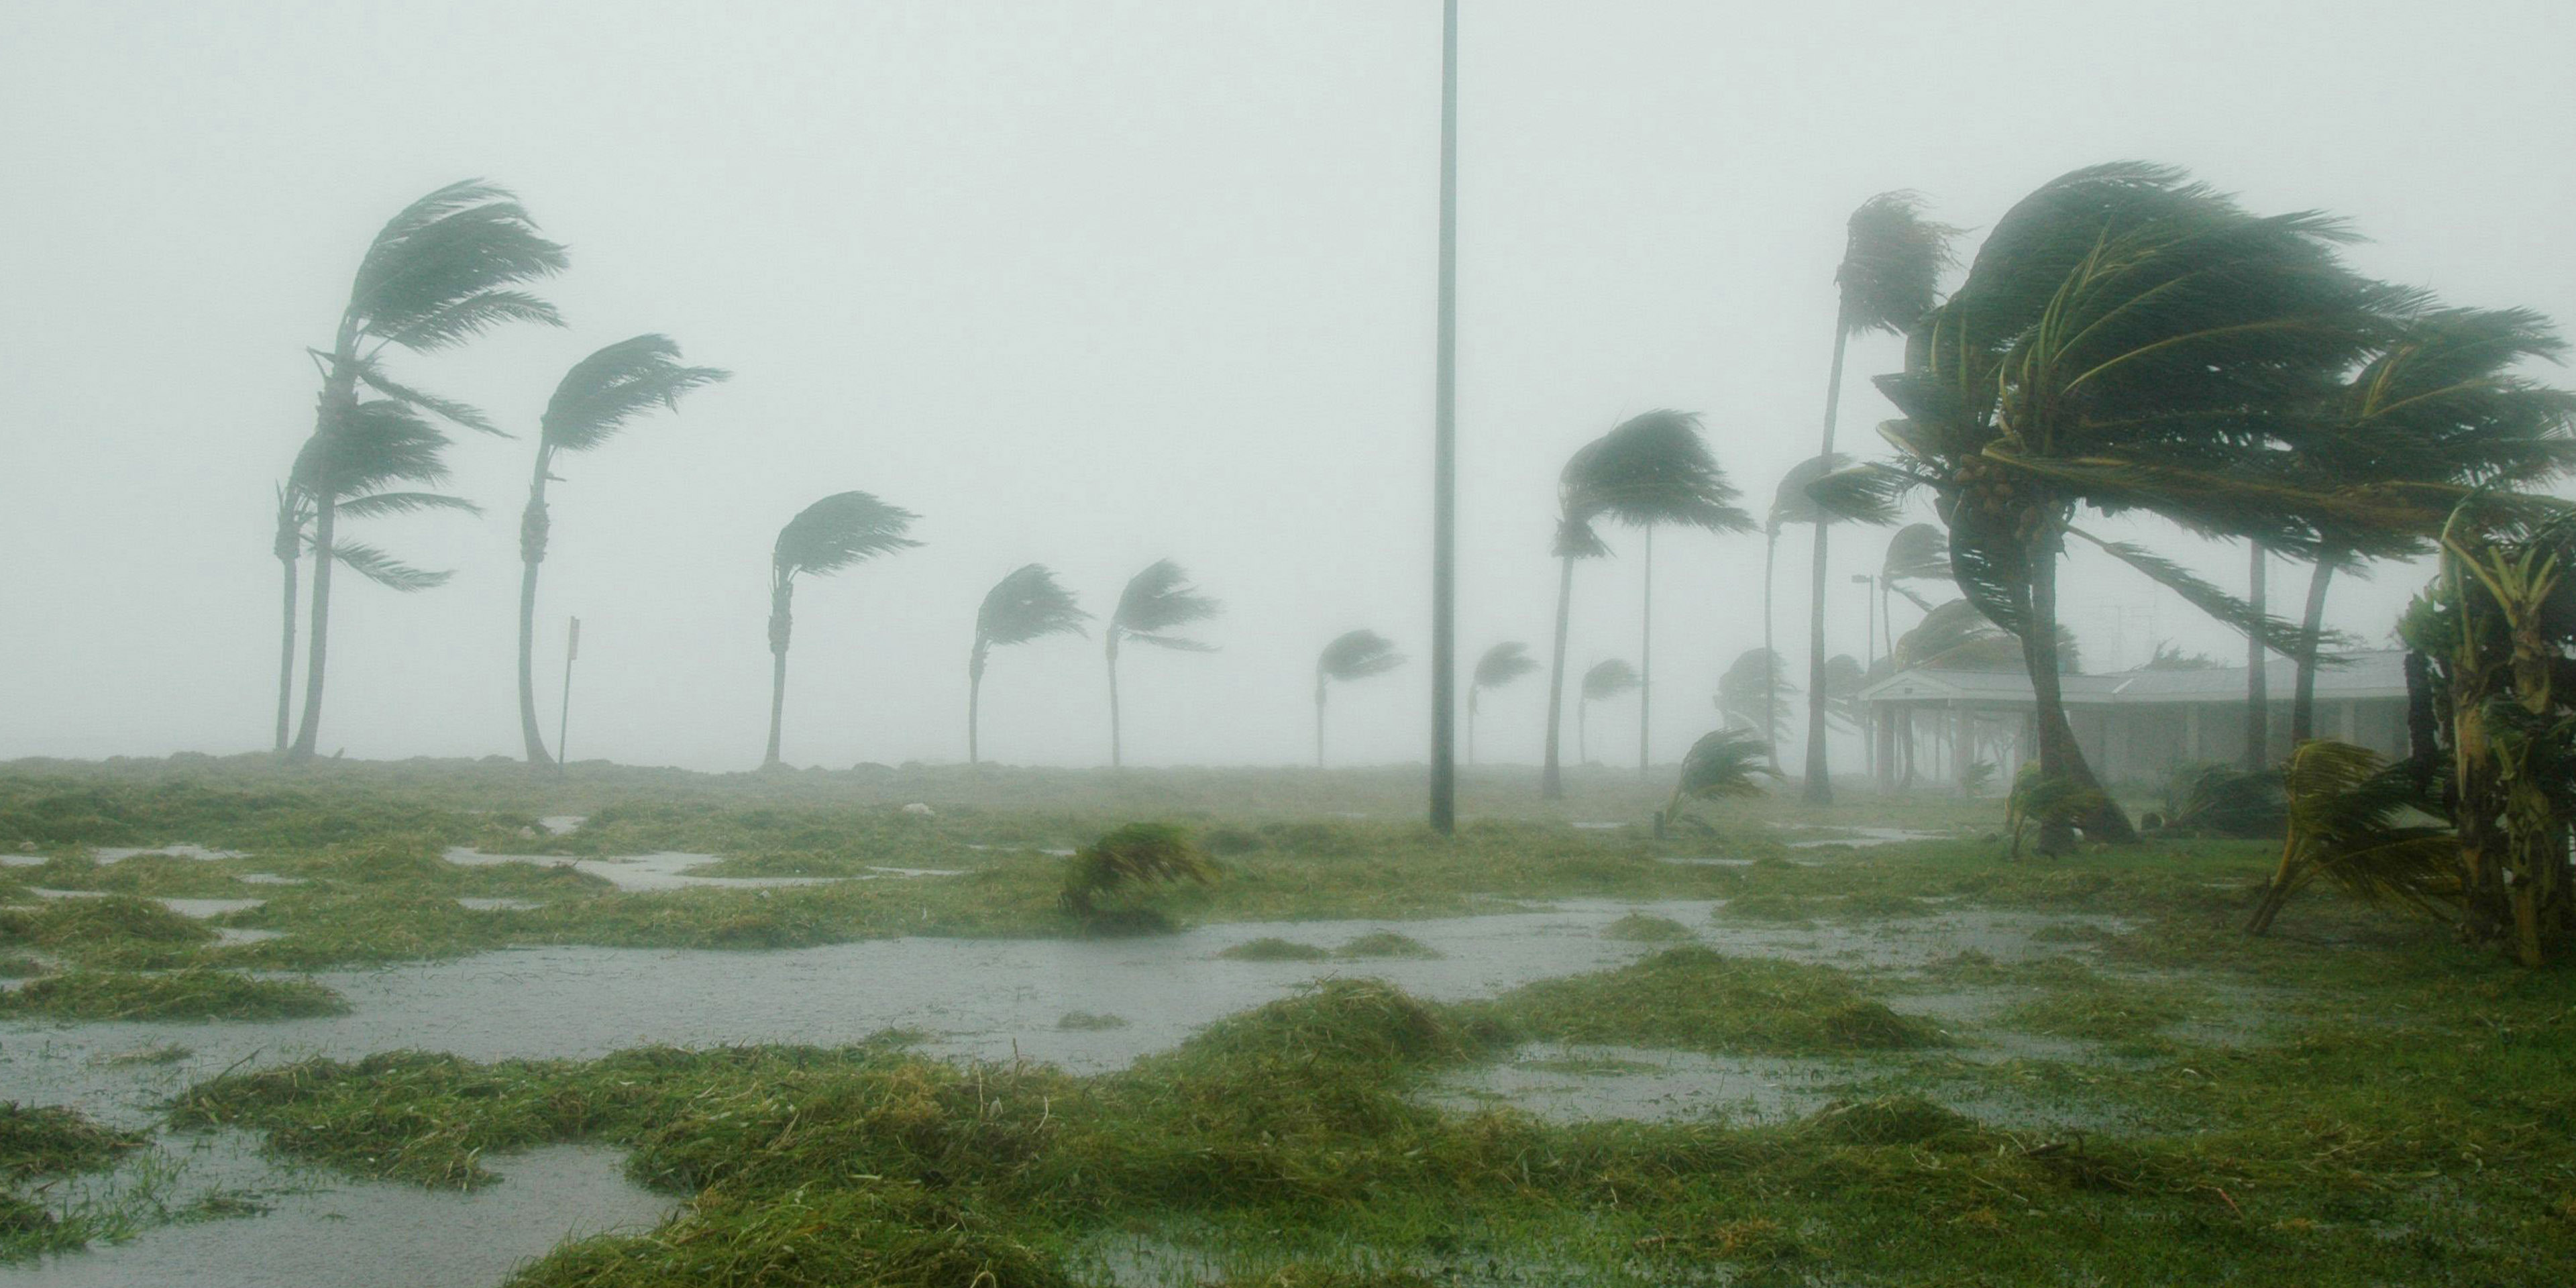 Palm trees blowing in heavy wind and heavy waves during storm